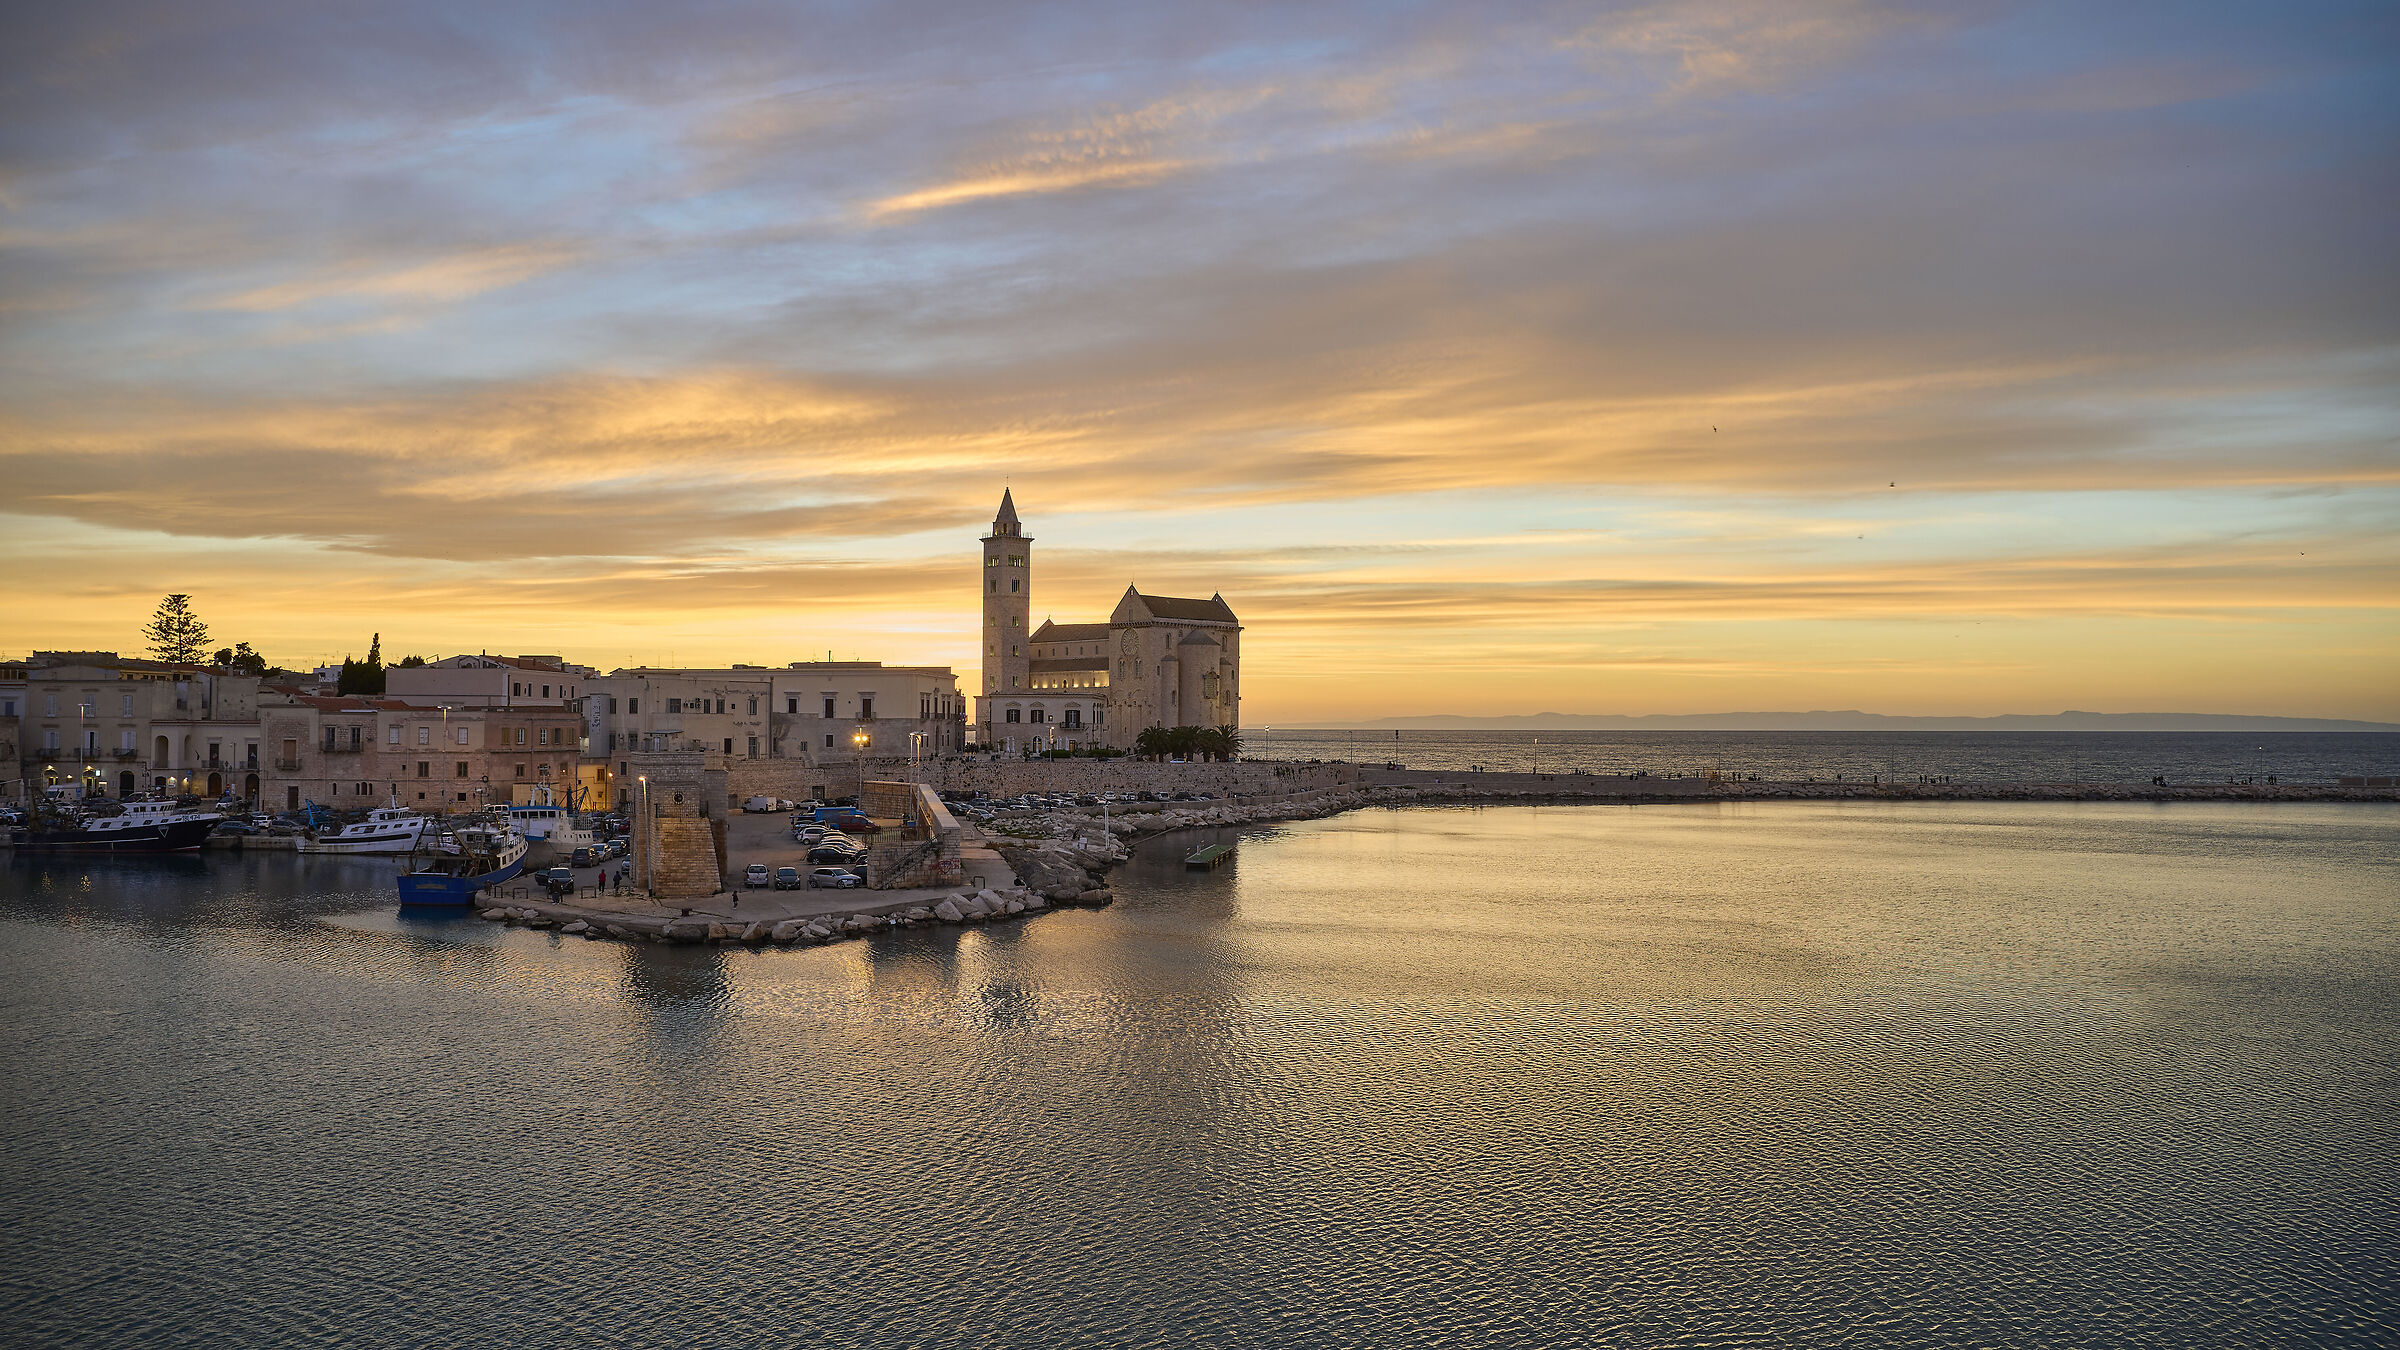 THE CATHEDRAL OF TRANI...